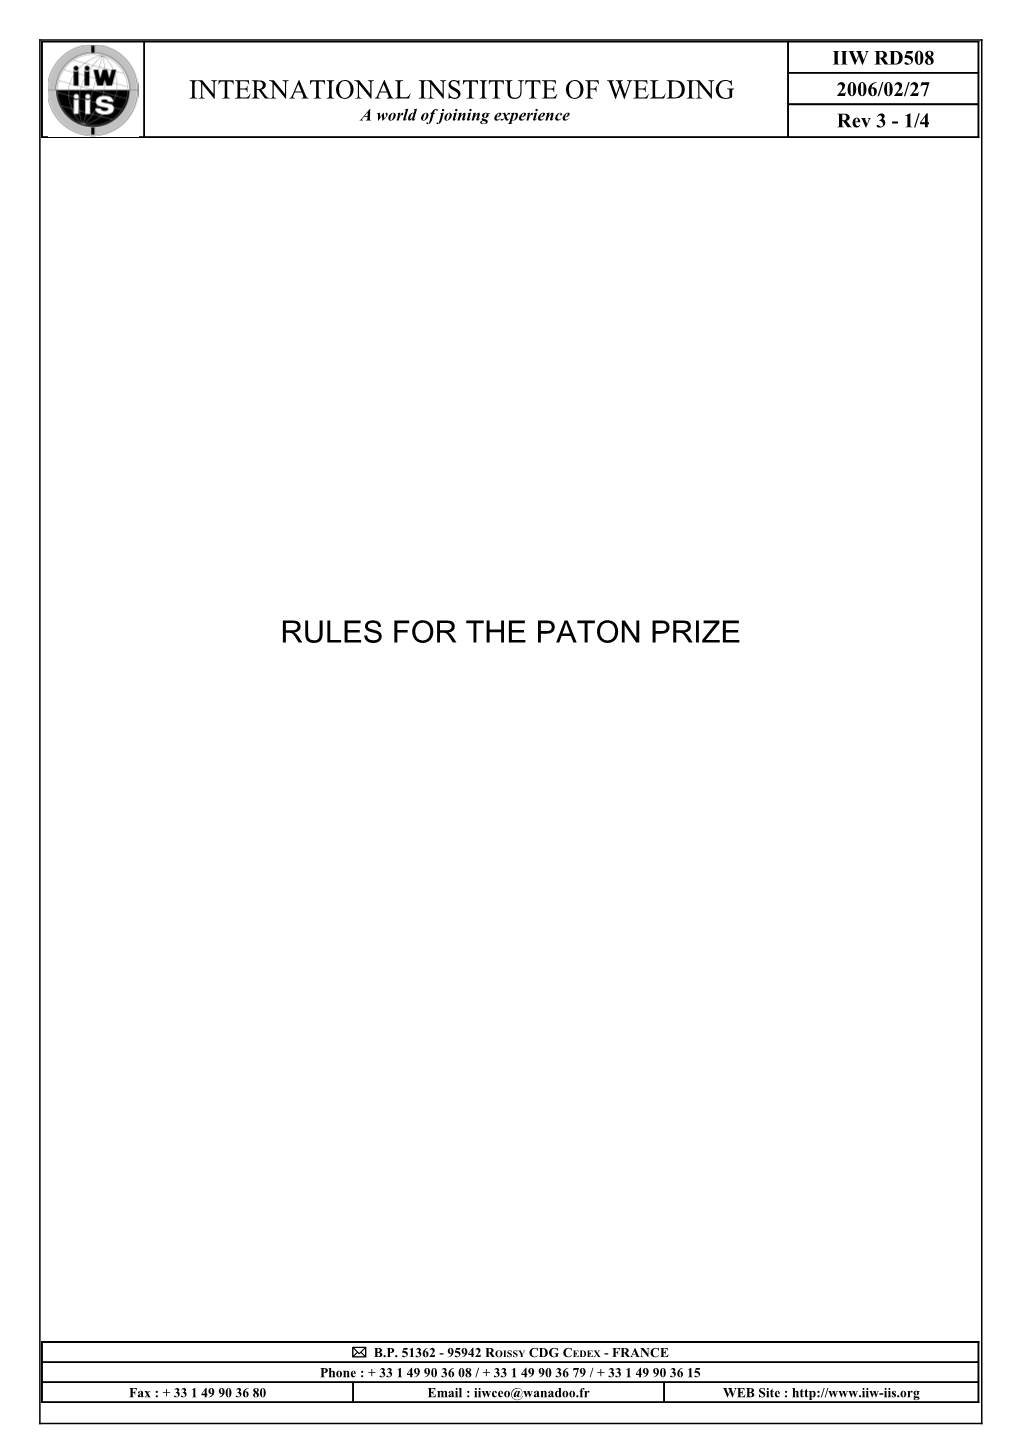 Rules for the Paton Prize